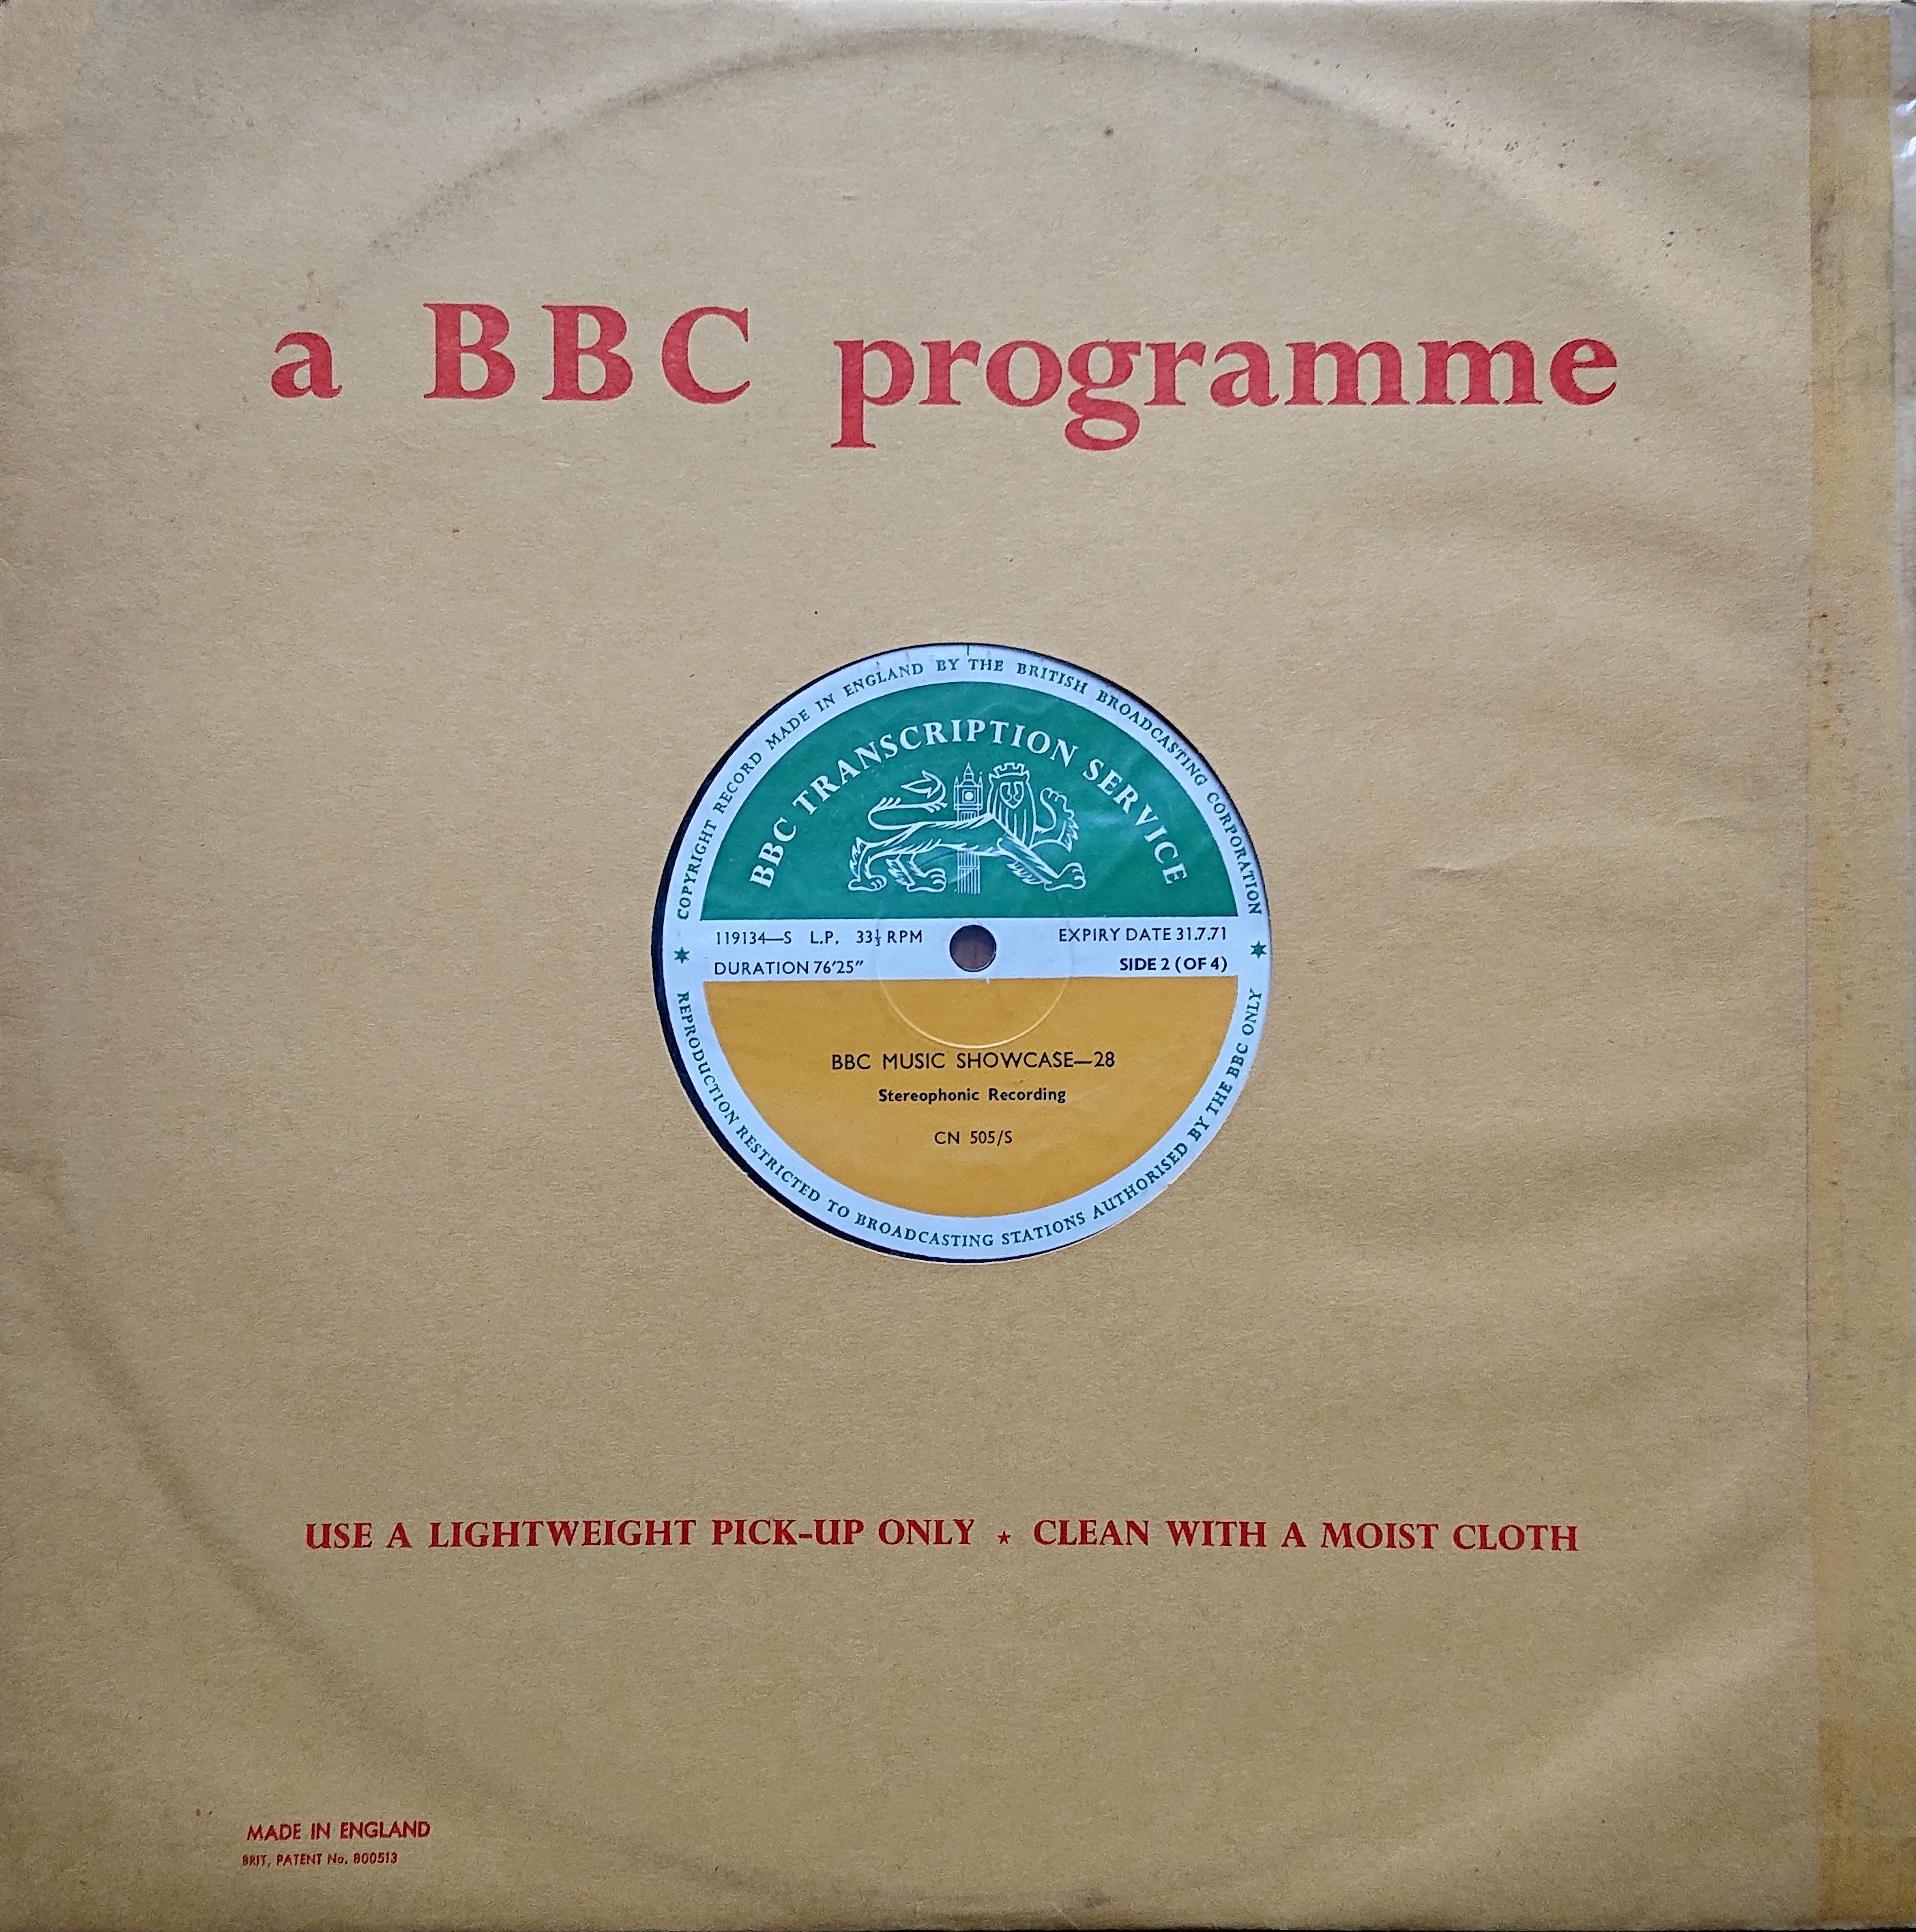 Picture of CN 505 S 56 BBC music showcase - 28 (Sides 2 & 4) by artist Various from the BBC records and Tapes library